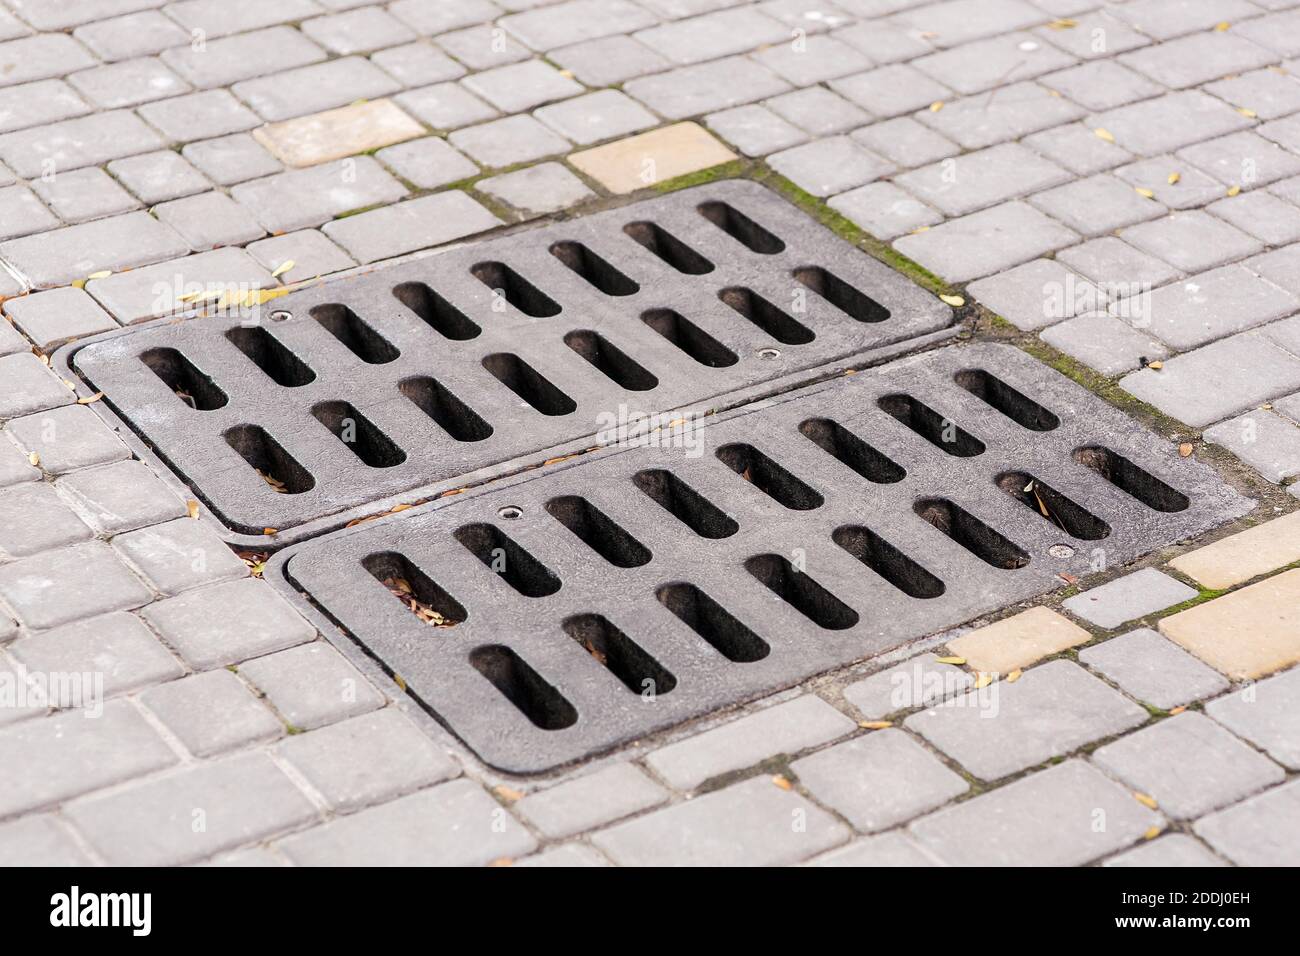 the square iron grating of the rainwater hatch cover on the stone tile pedestrian sidewalk, closeup side view of the drainage system. Stock Photo